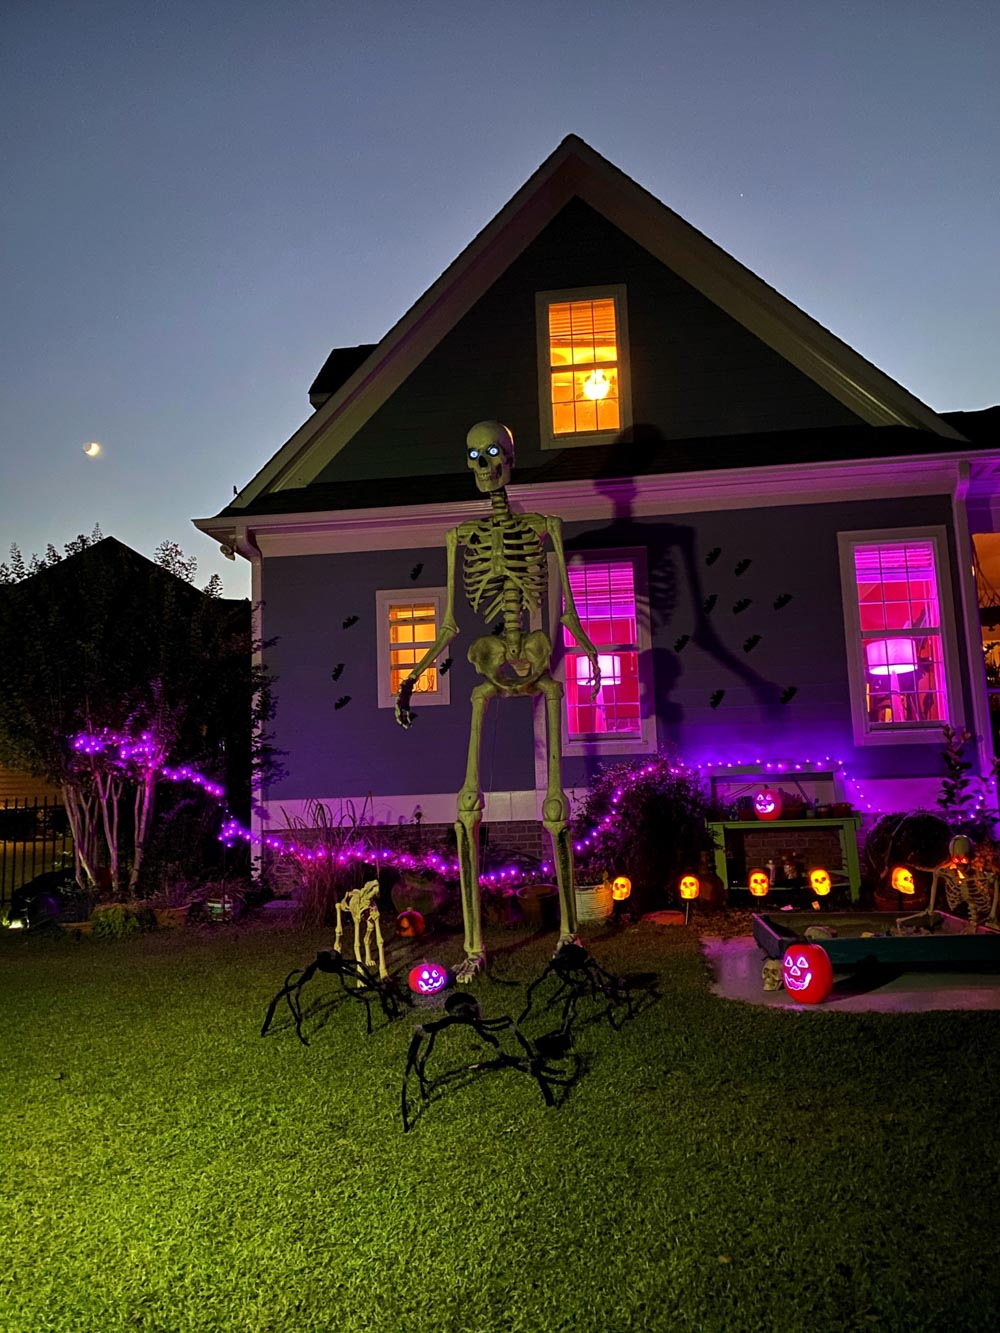 A giant skeleton standing in a dark front yard lit up by purple Halloween lights.